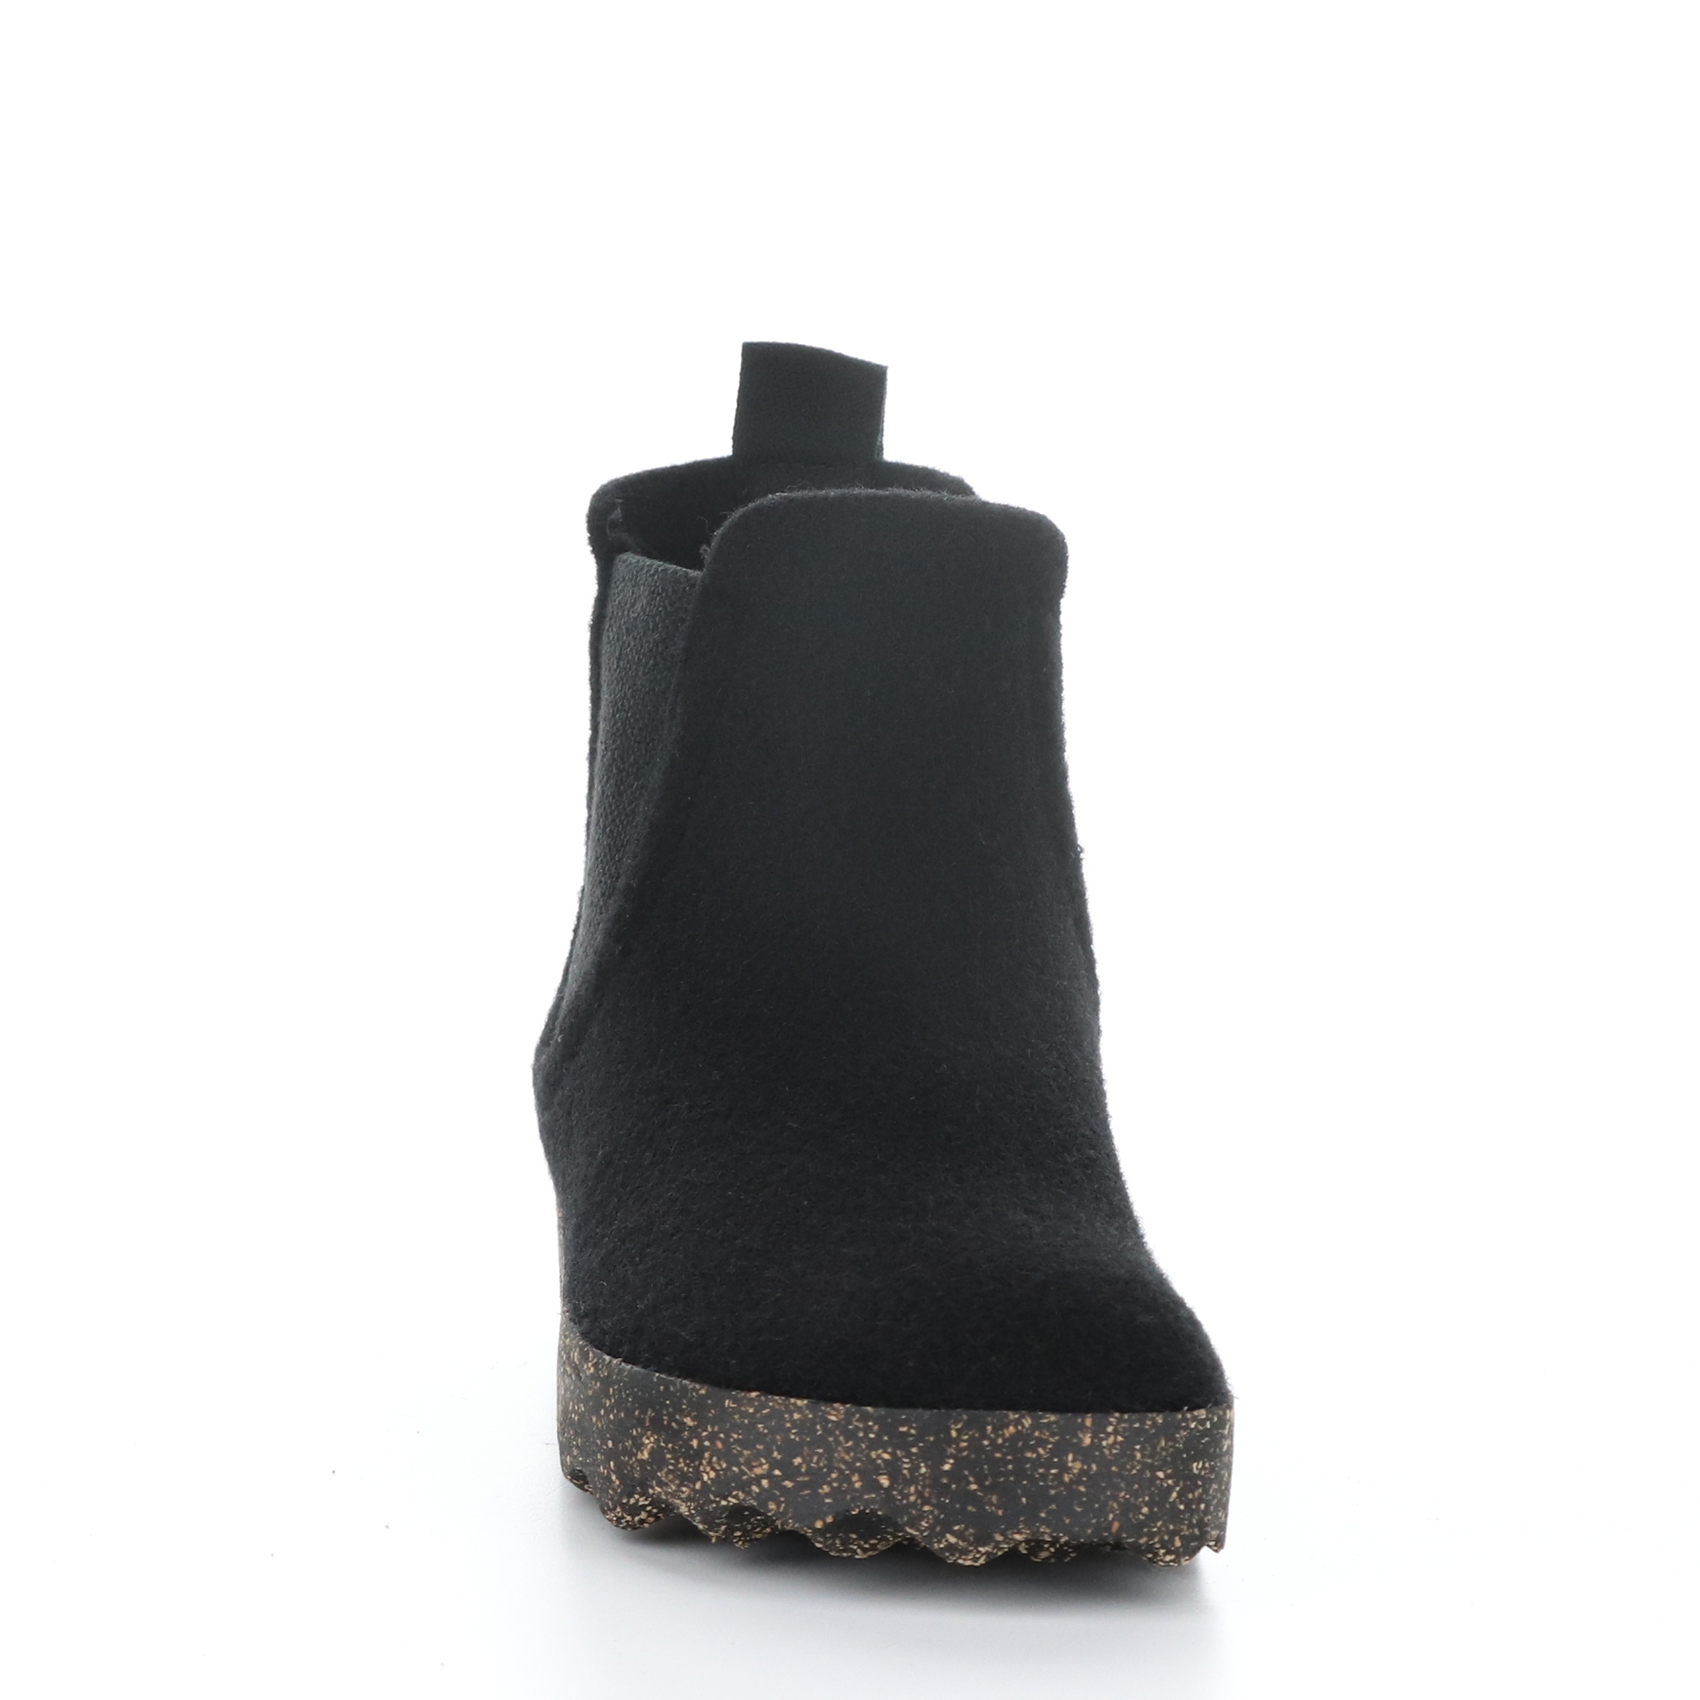 Front view of the asportuguesas caia black boot. This chelsea boot is felt with elastic sides and a cork looking sole.